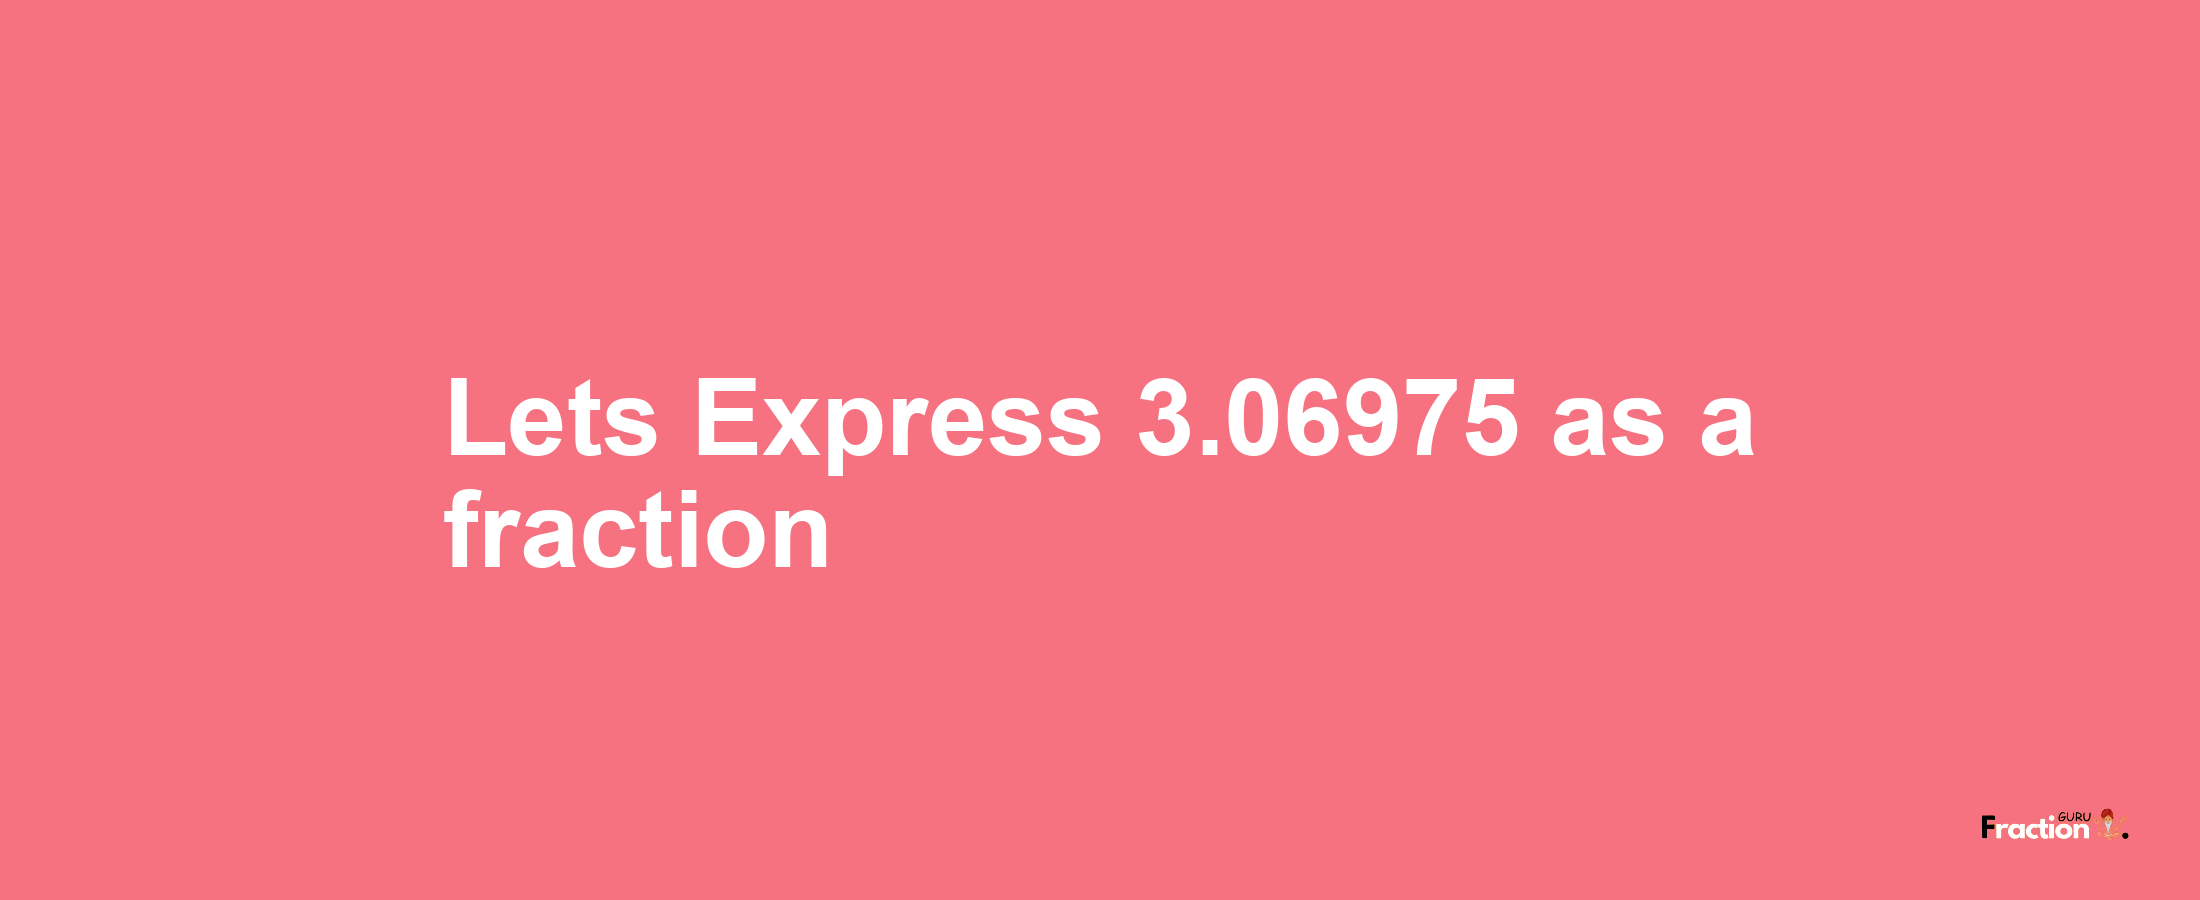 Lets Express 3.06975 as afraction